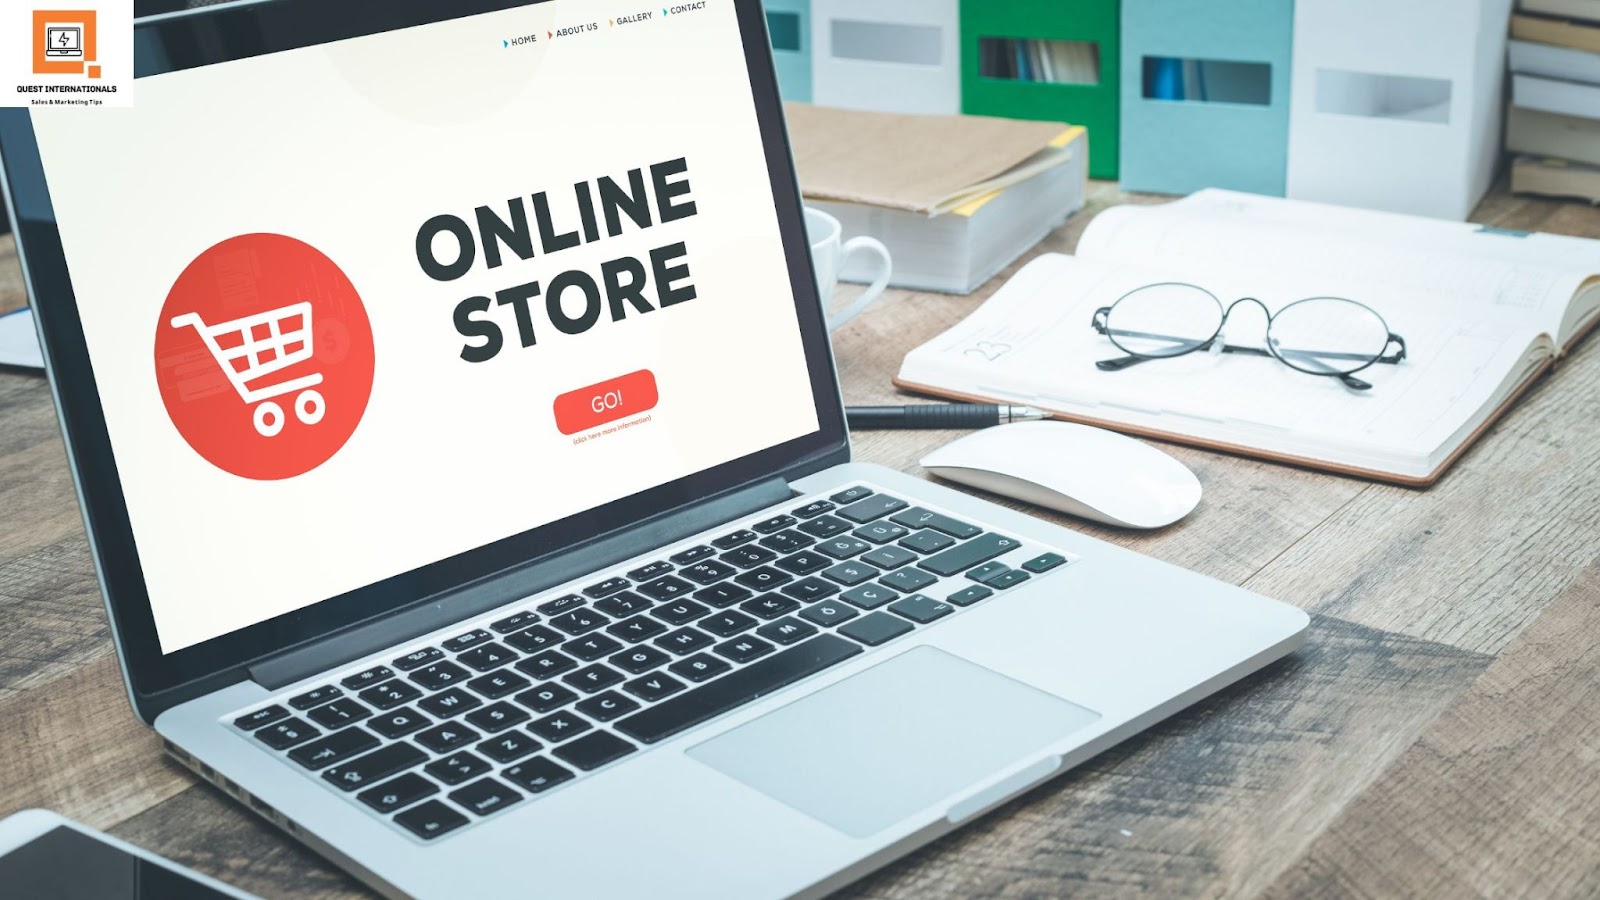 how to start a online store